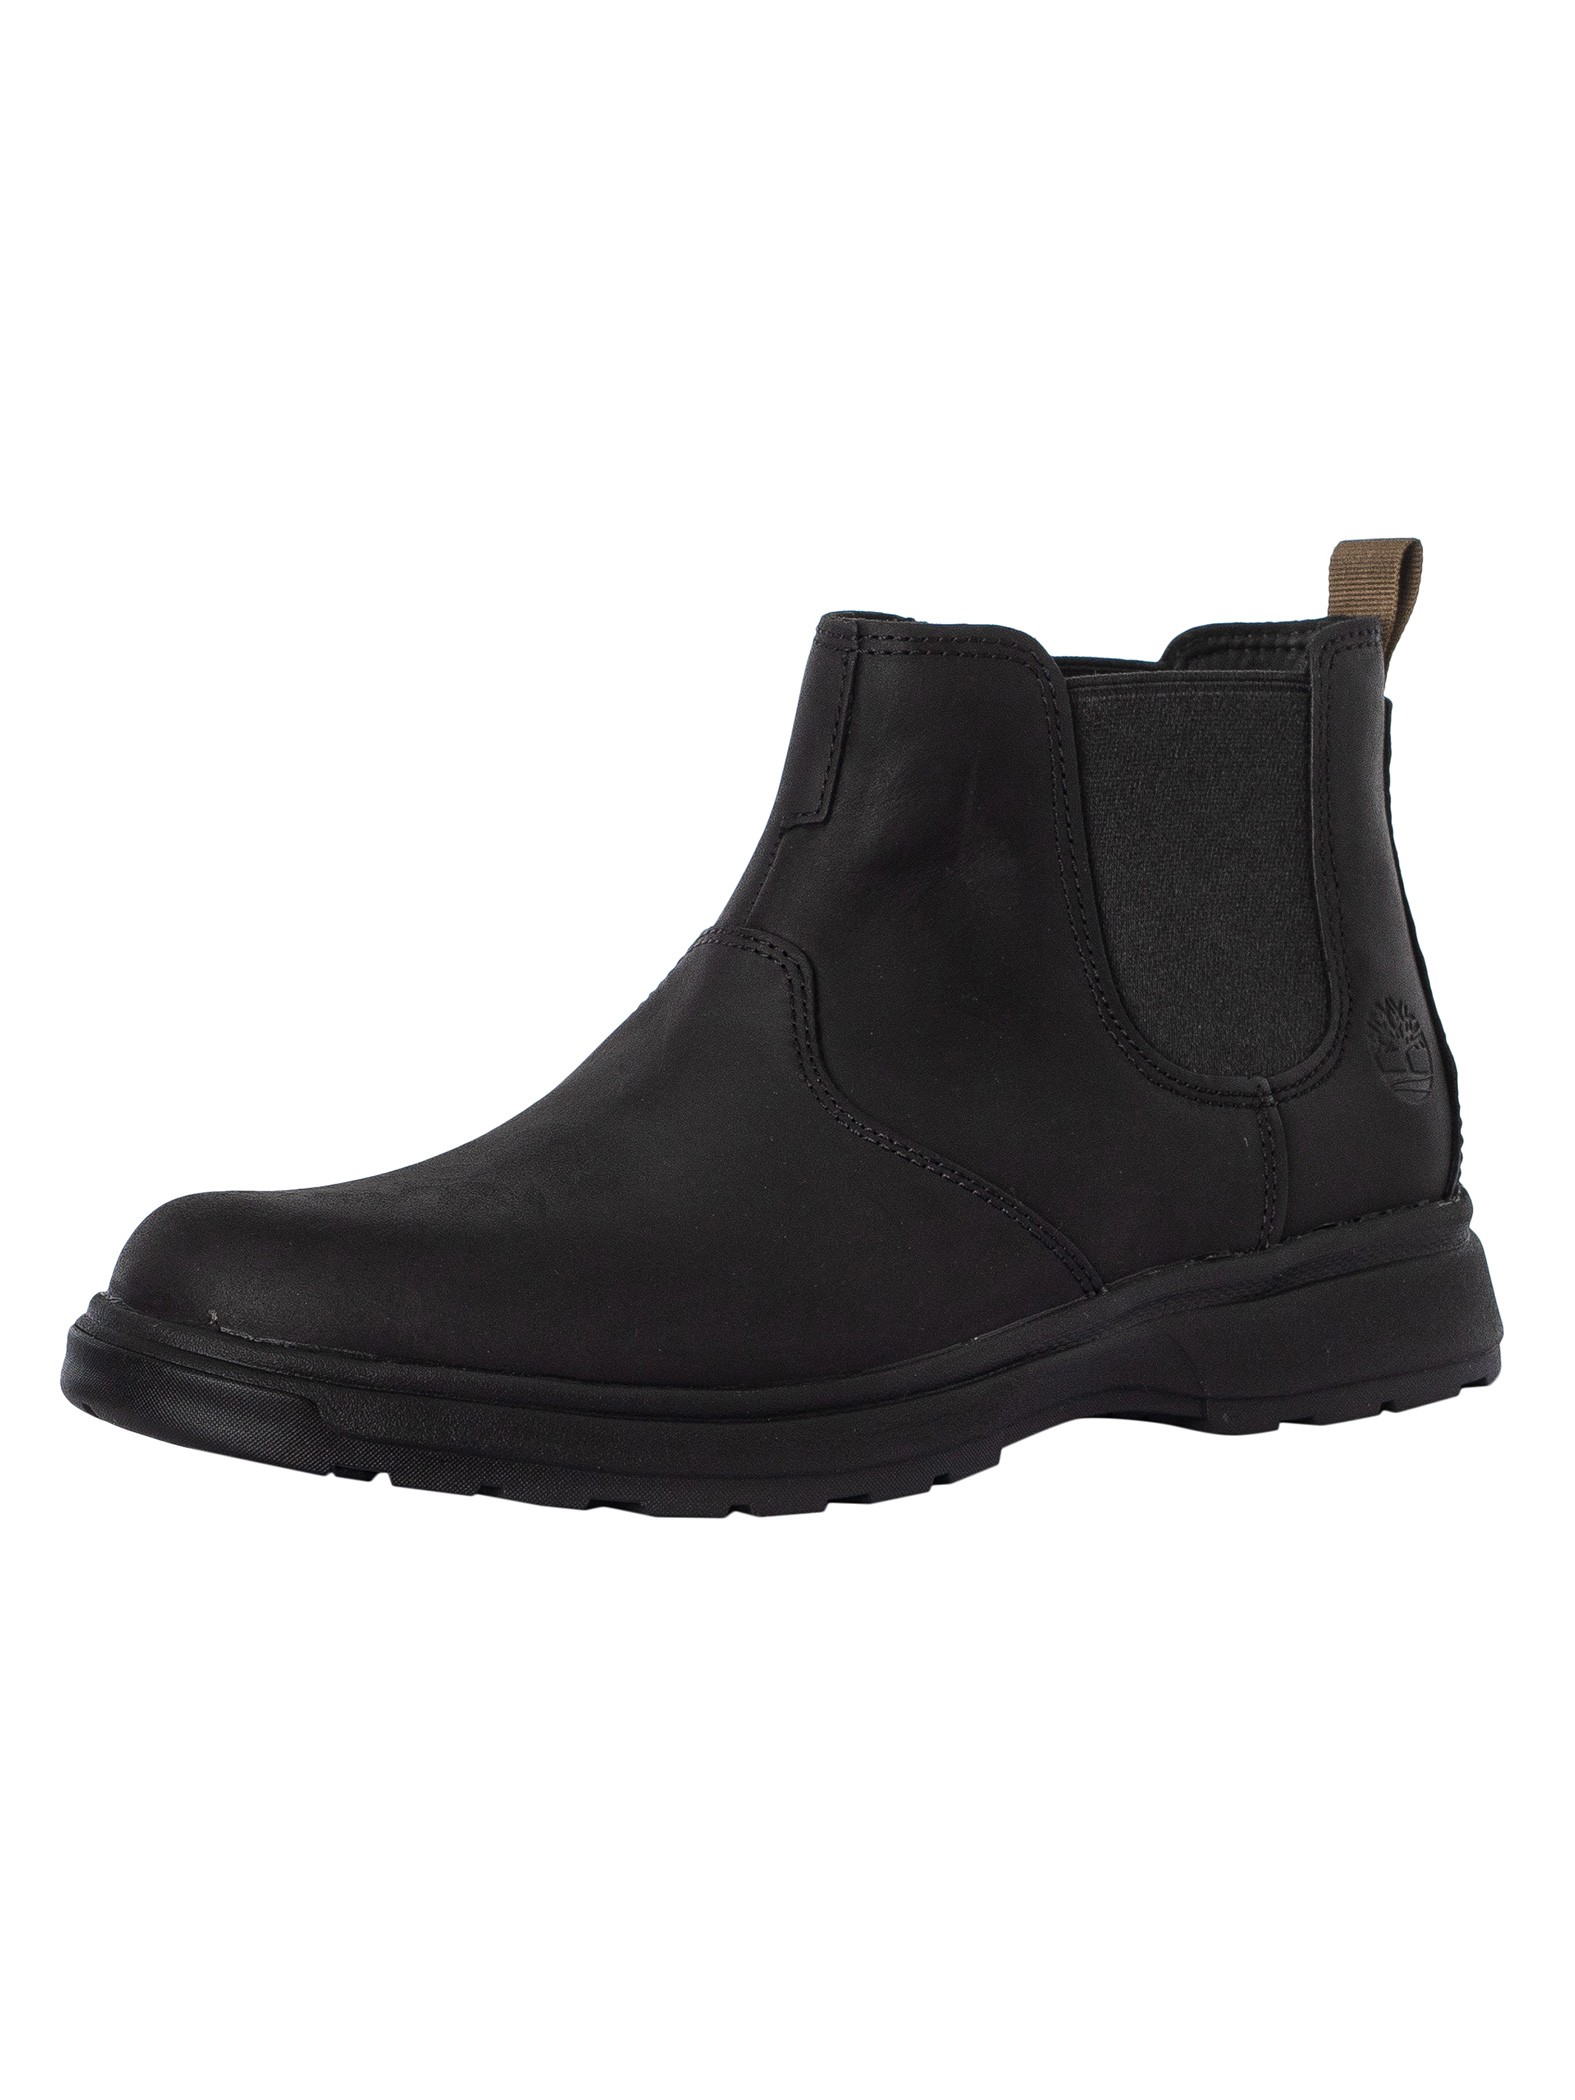 Atwells Ave Chelsea Boots